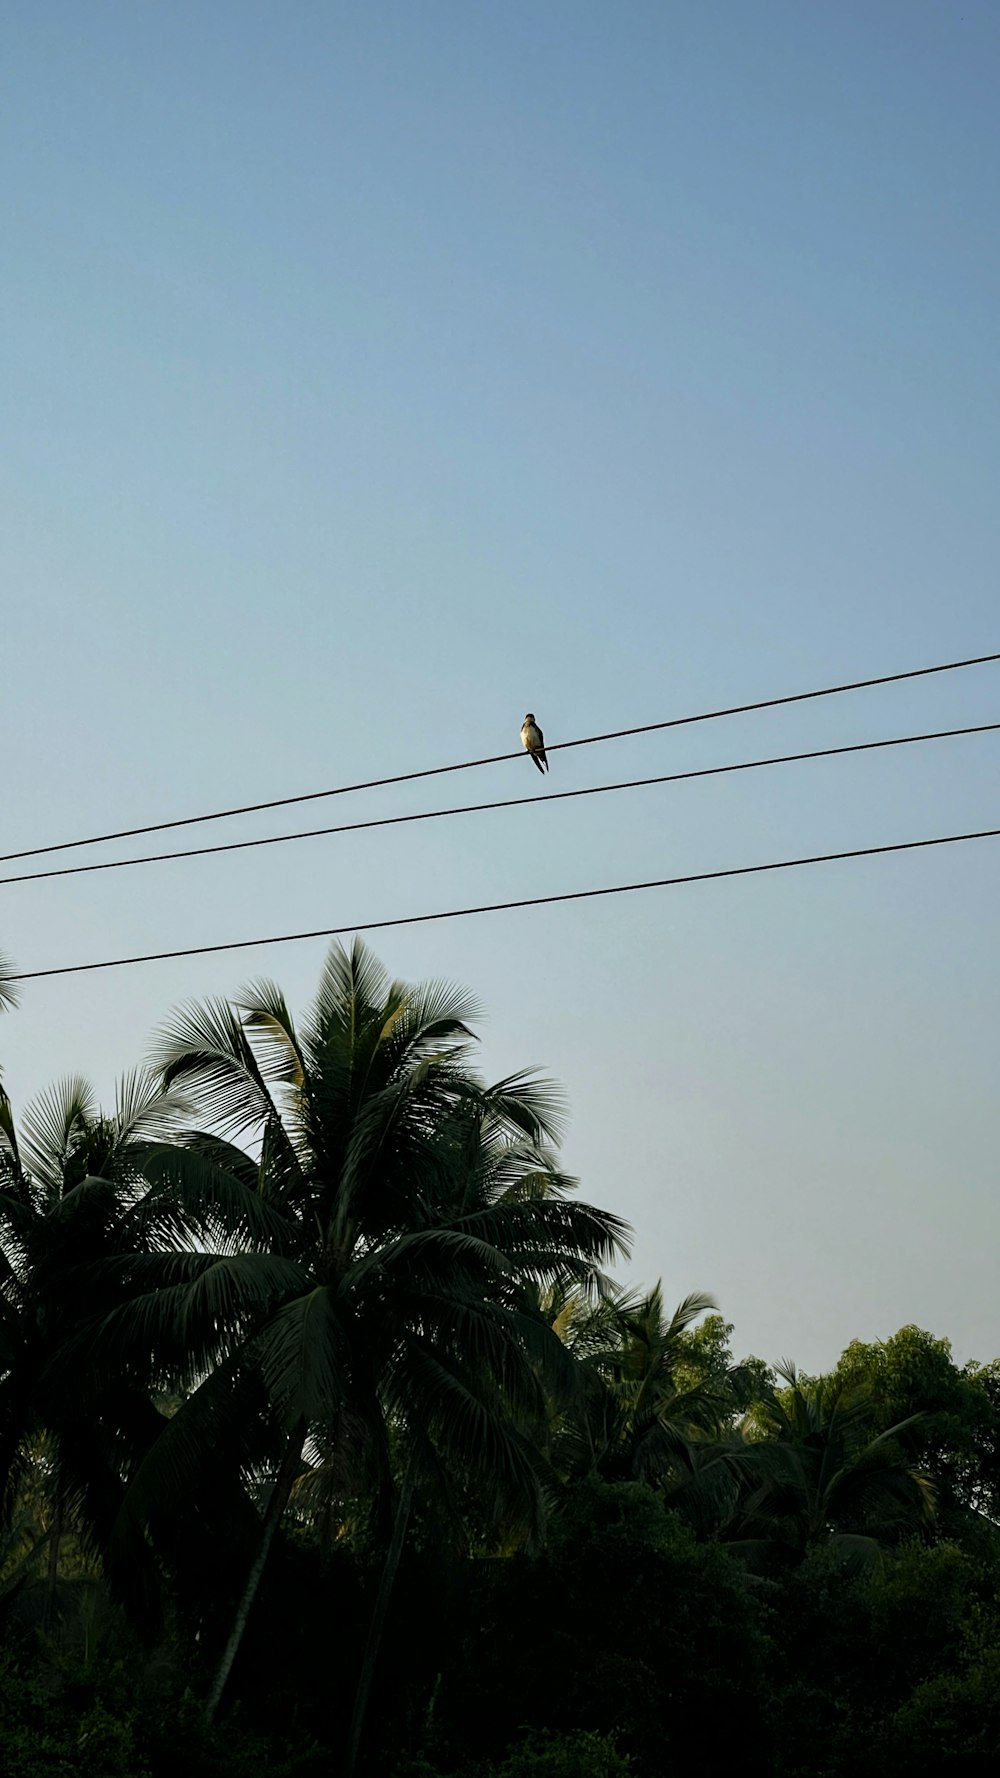 a bird sitting on a power line with palm trees in the background